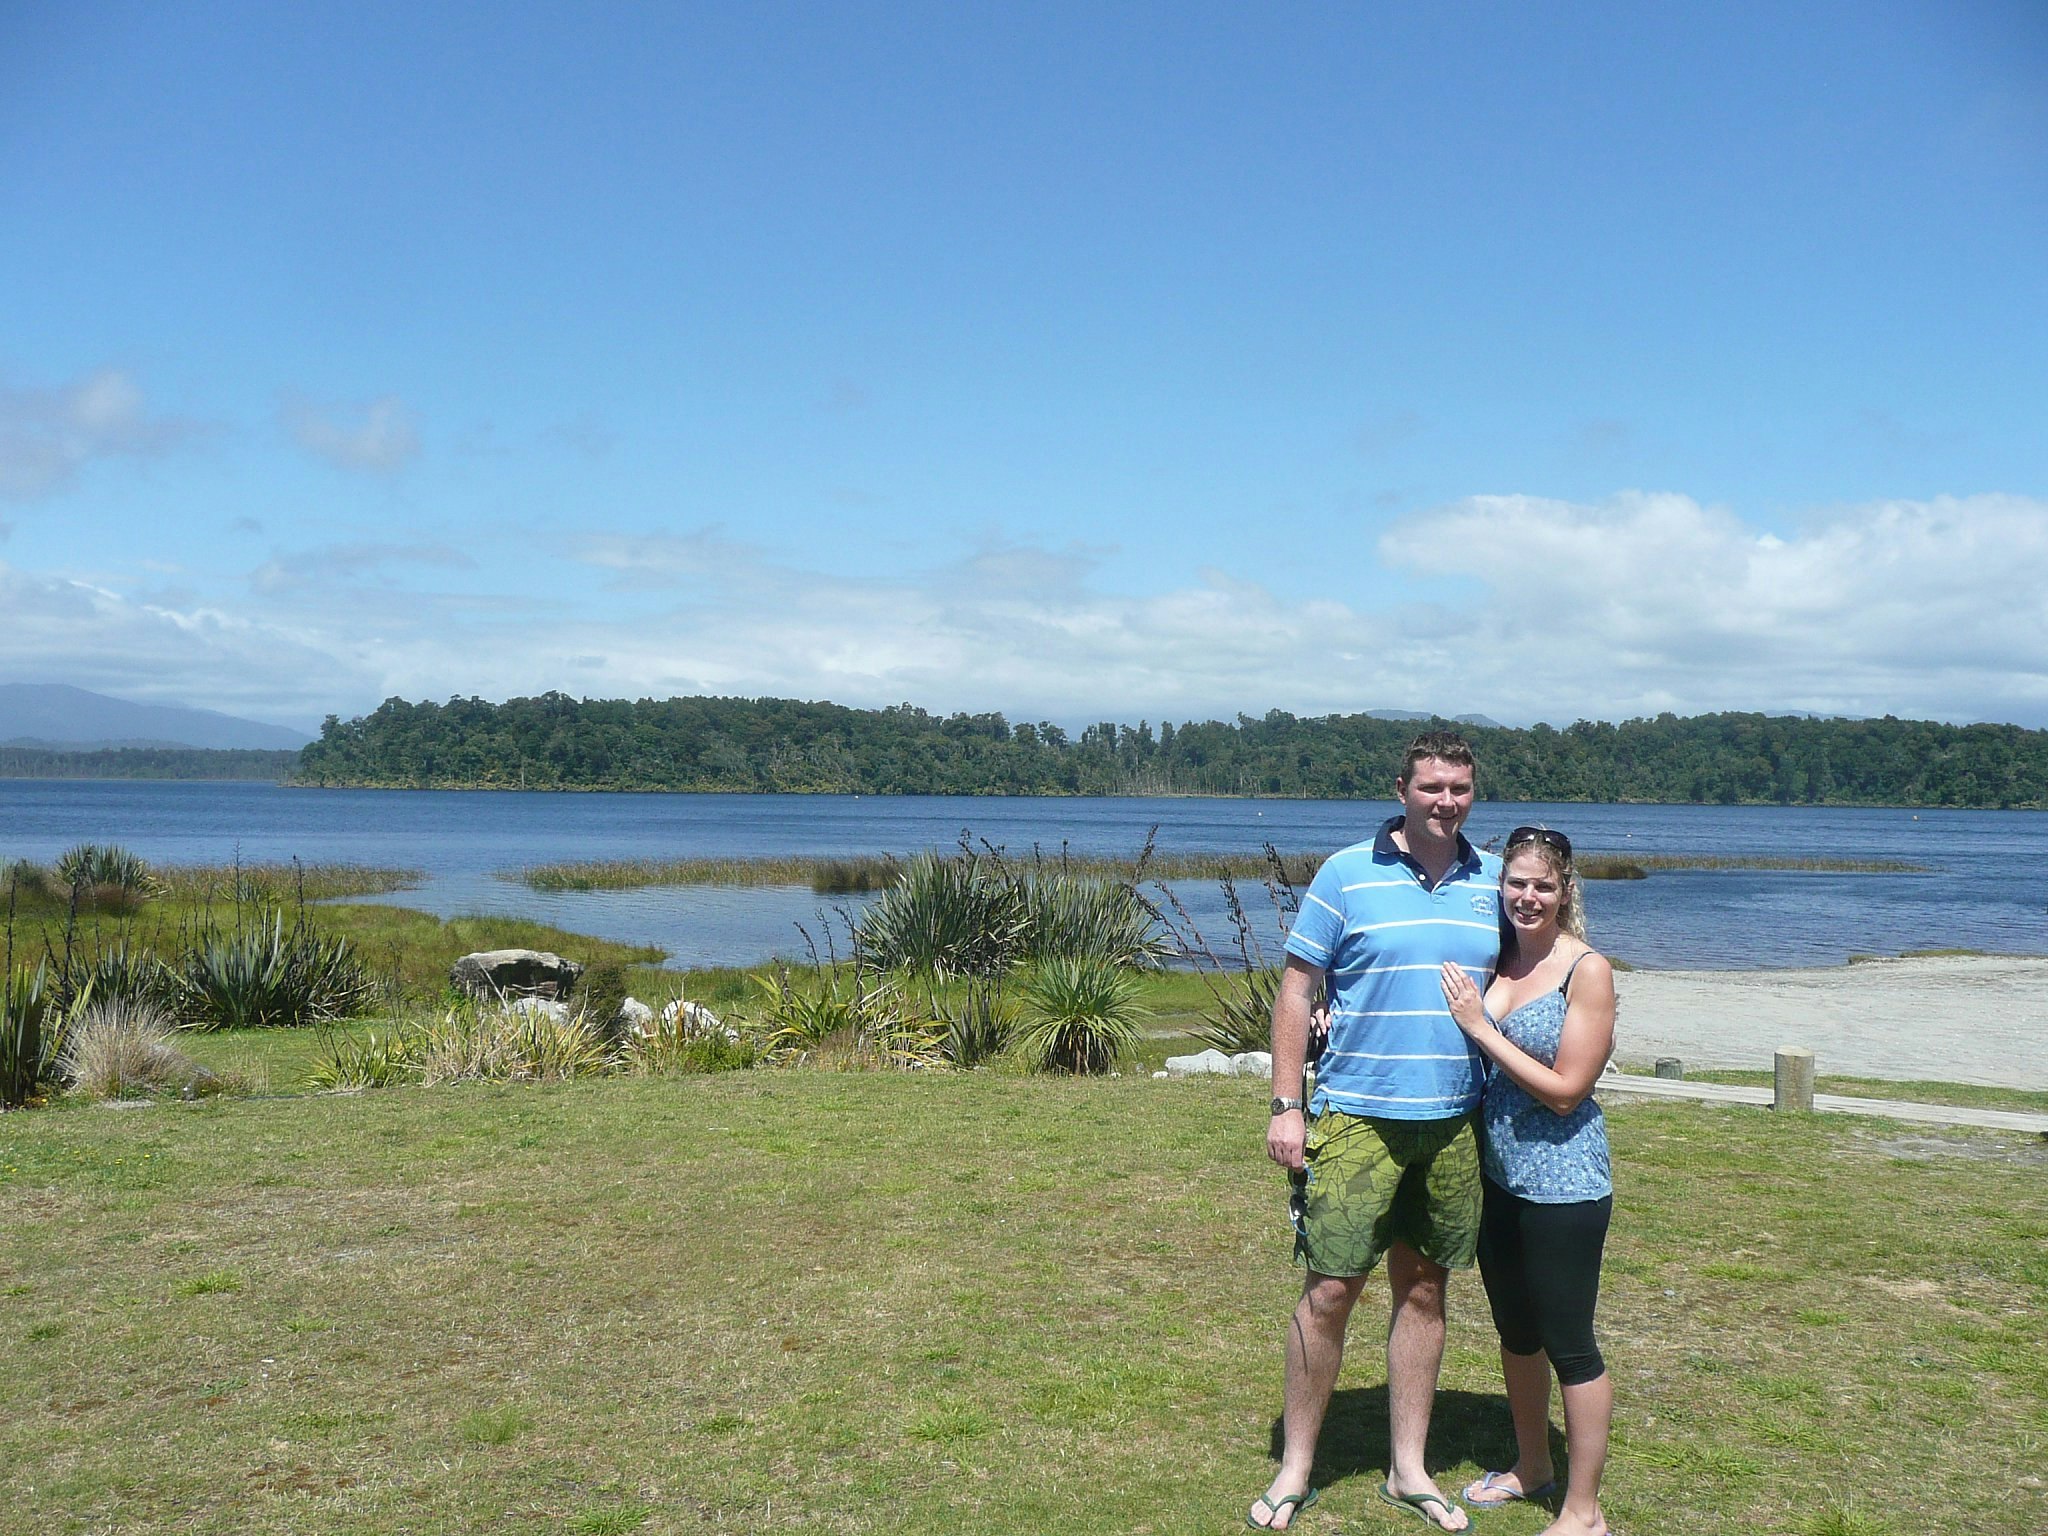 Lonely Planet staffer Becky and her partner stand in front of Lake Mahinapua, New Zealand on a sunny day; the far shore of the lake is tree-lined and there are mountains beyond.